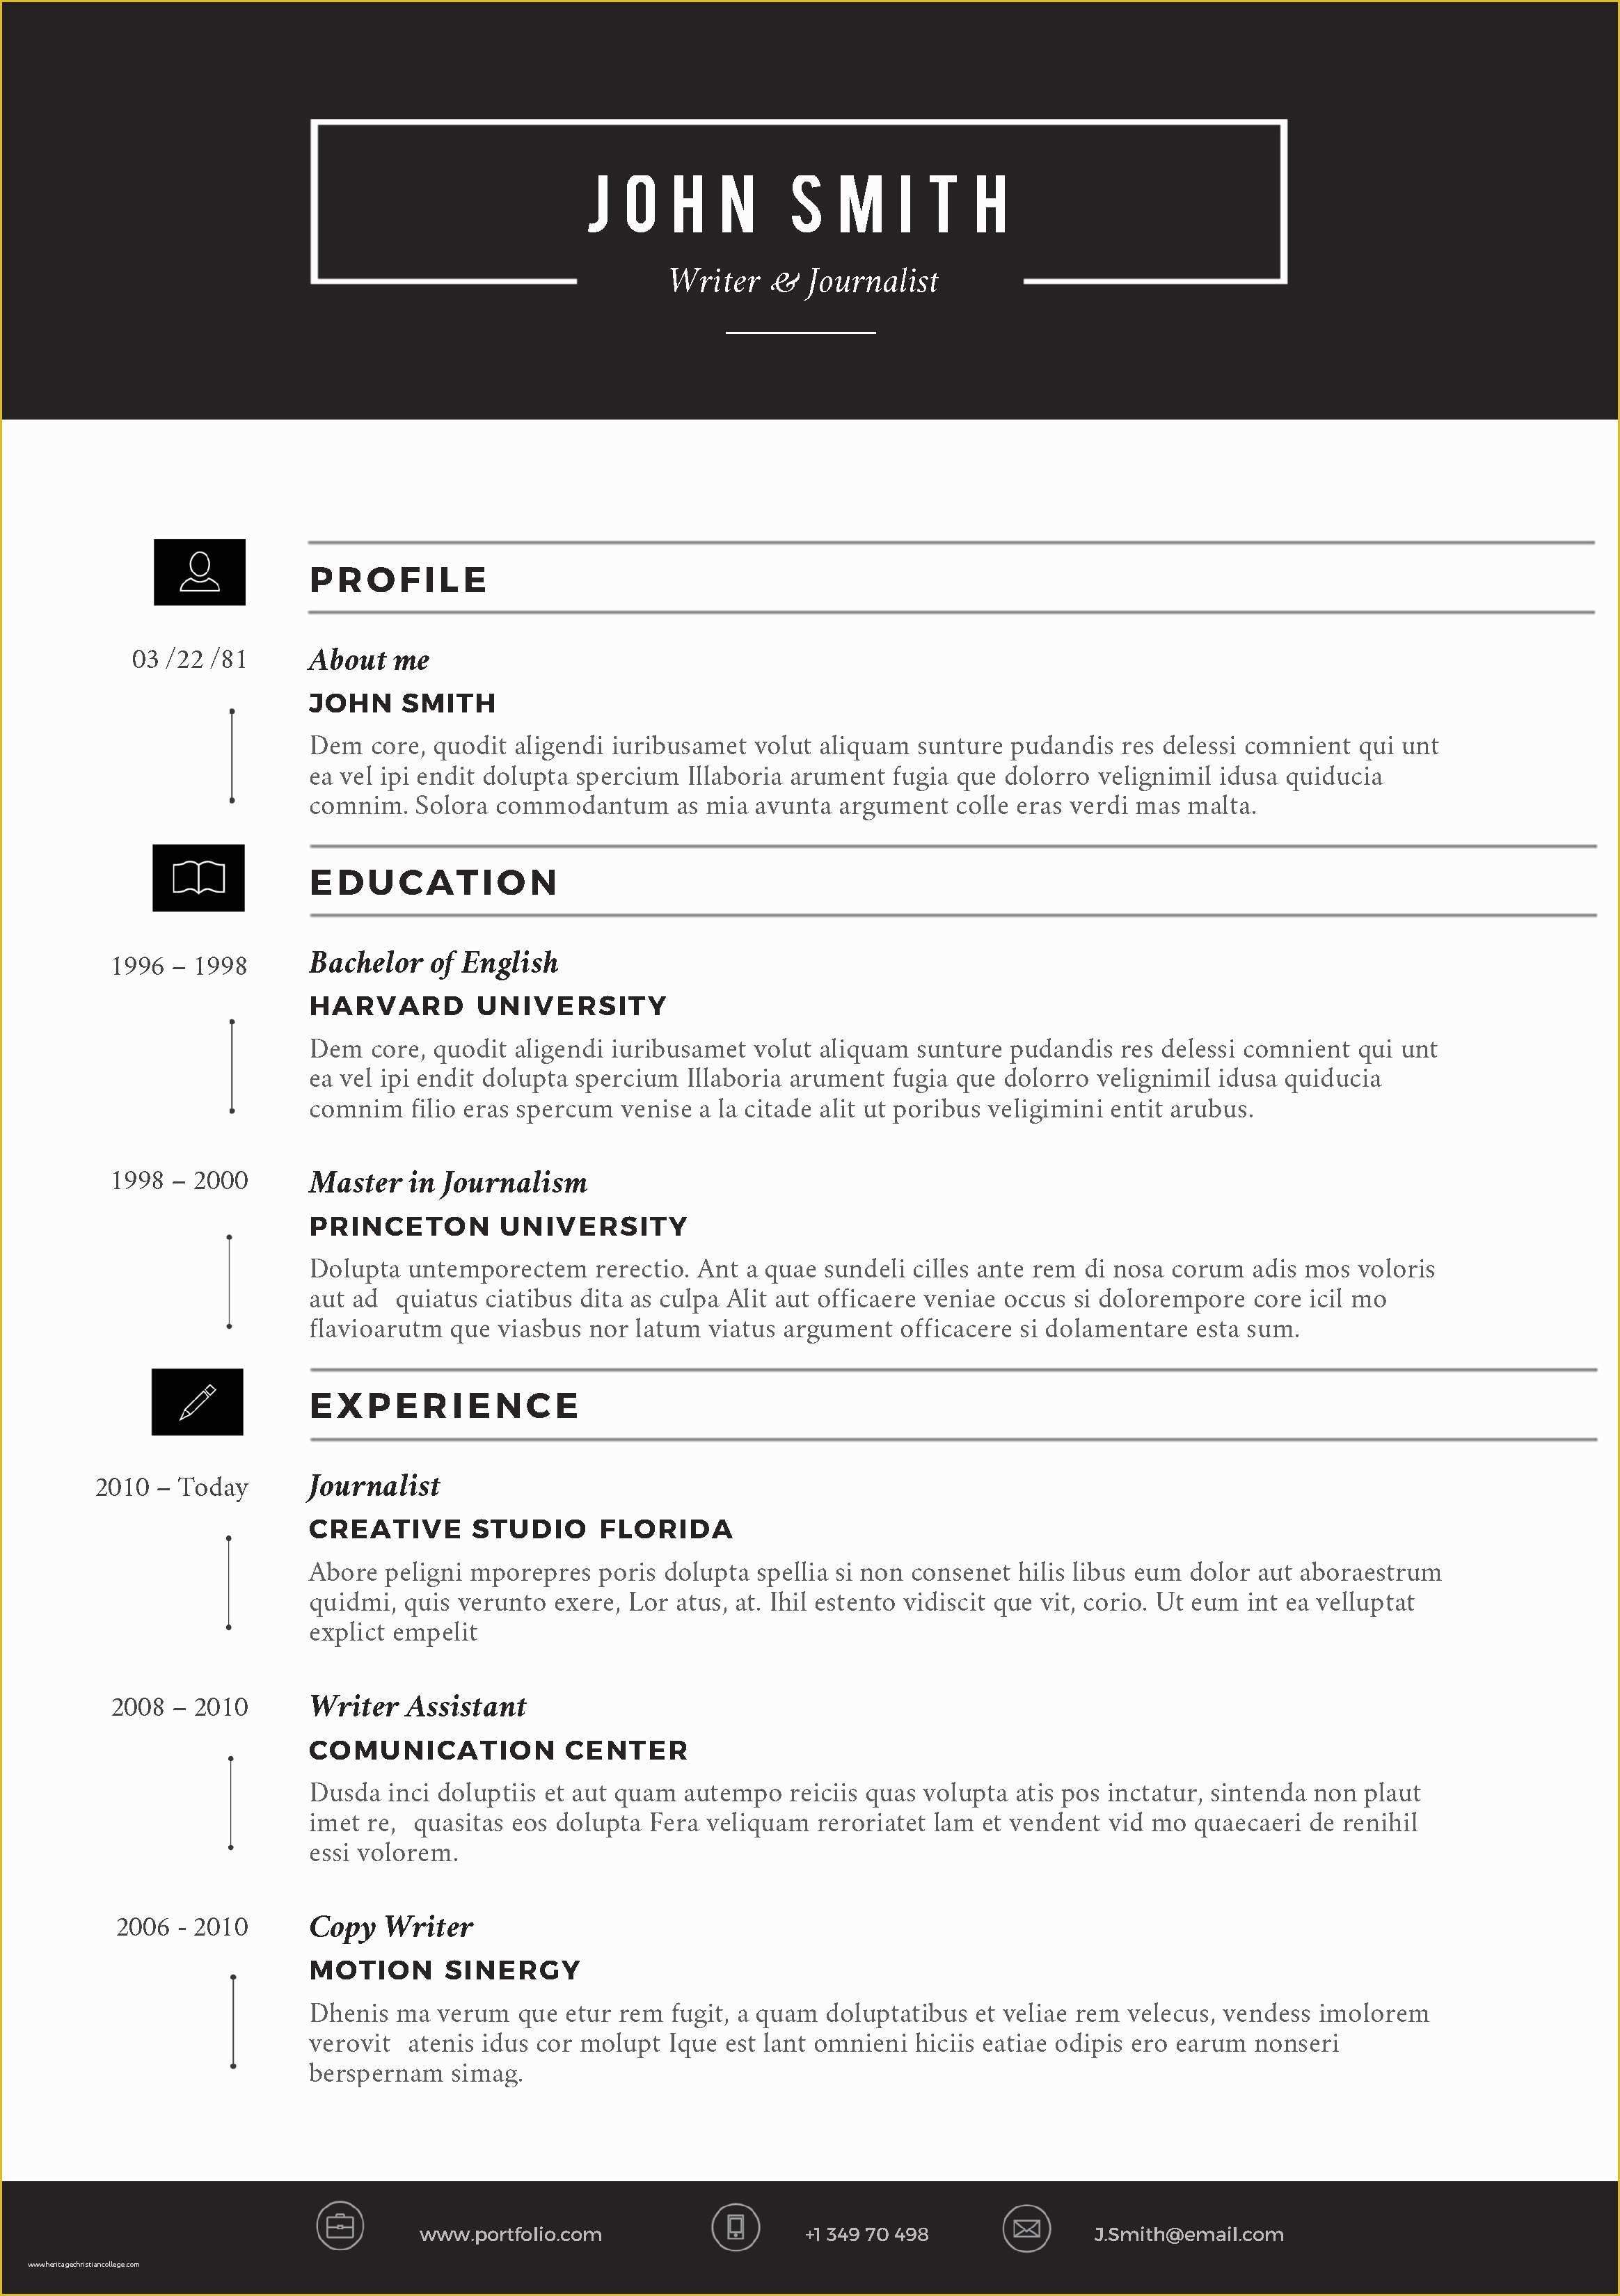 Creative Resume Templates Free Download For Microsoft Word Of Cvfolio 